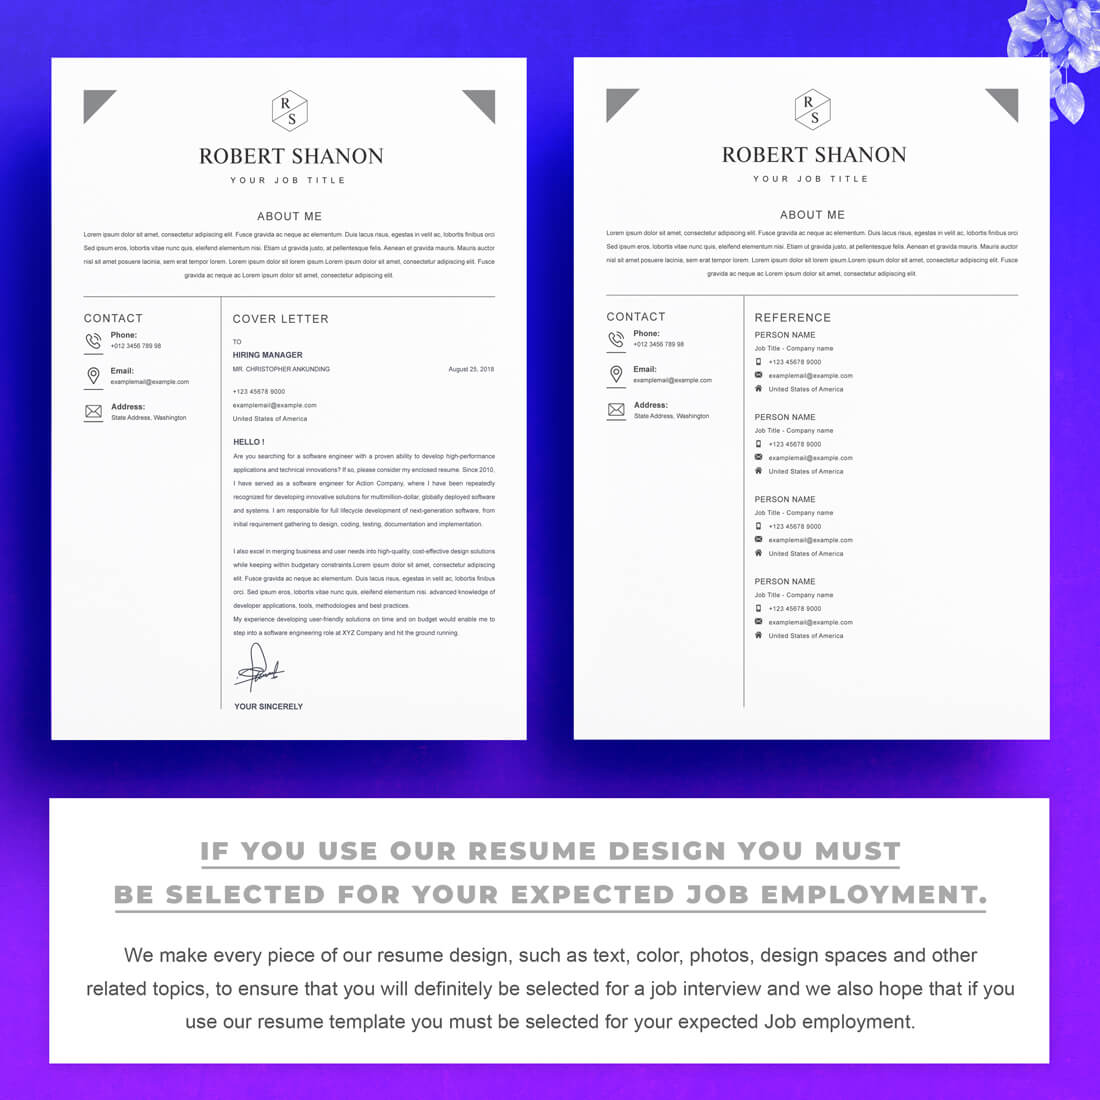 03 2 pages free resume design template copy copy 177